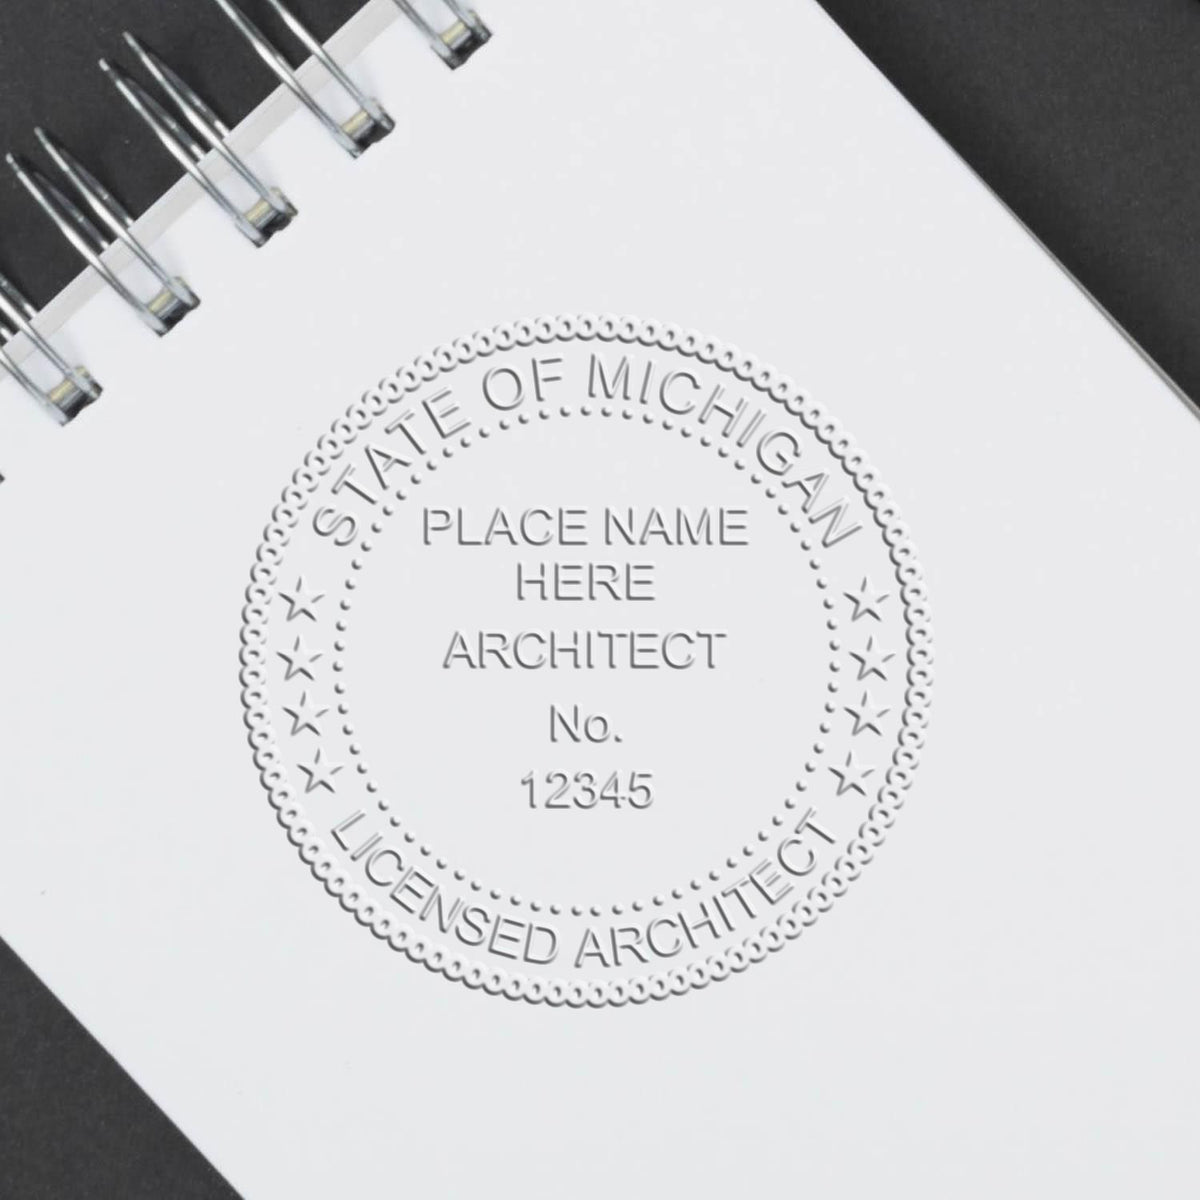 A photograph of the Hybrid Michigan Architect Seal stamp impression reveals a vivid, professional image of the on paper.